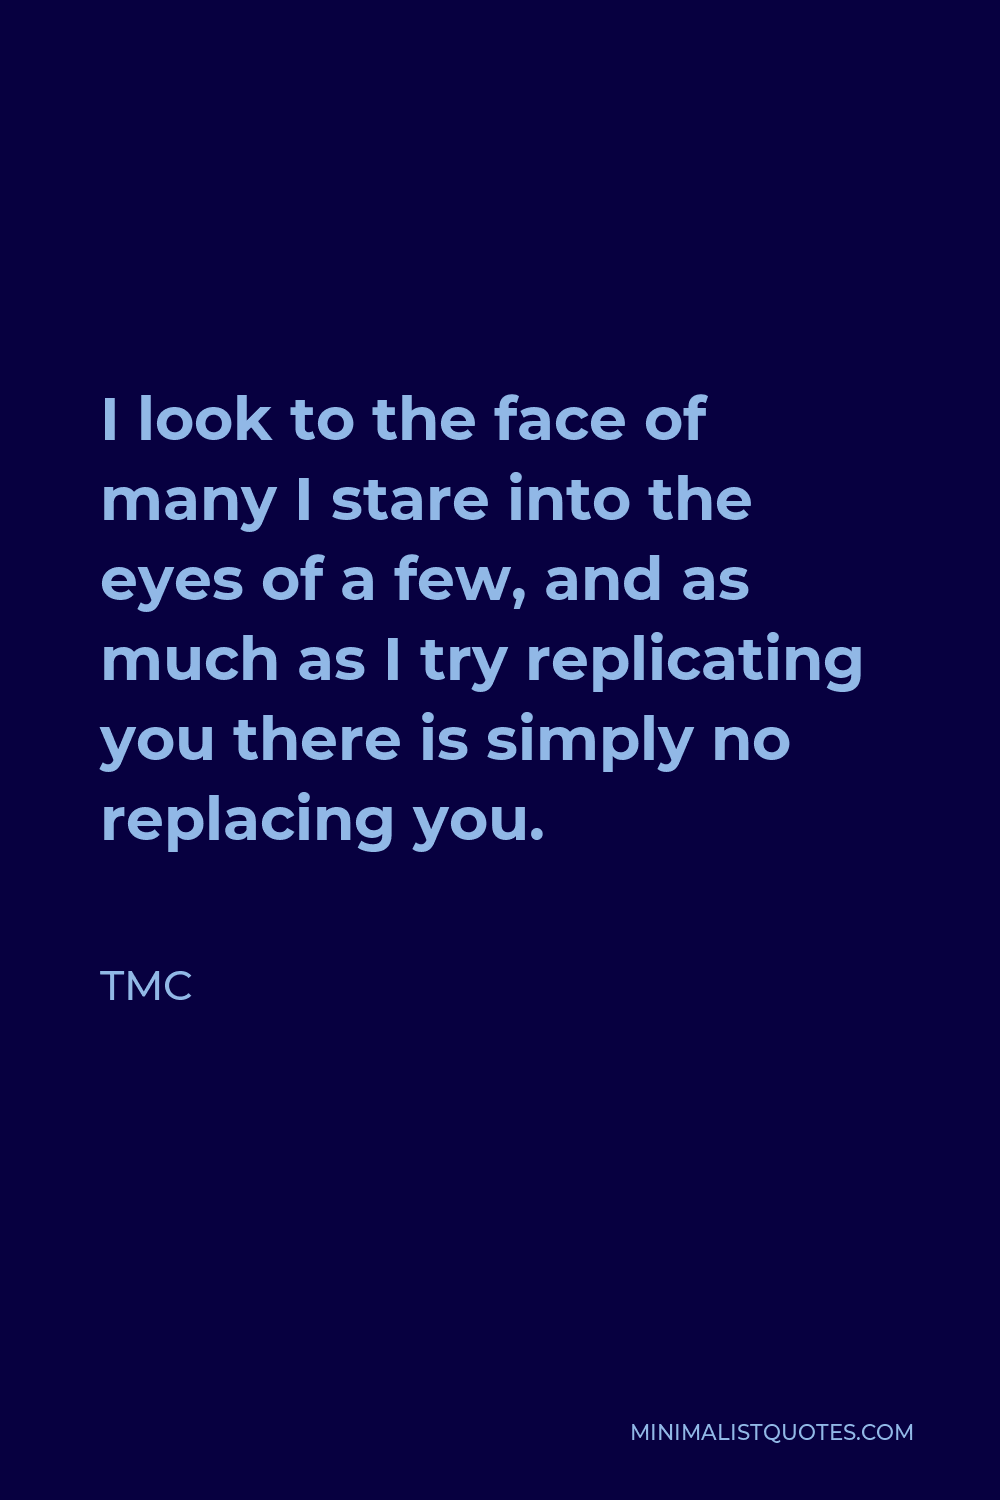 TMC Quote - I look to the face of many I stare into the eyes of a few, and as much as I try replicating you there is simply no replacing you.